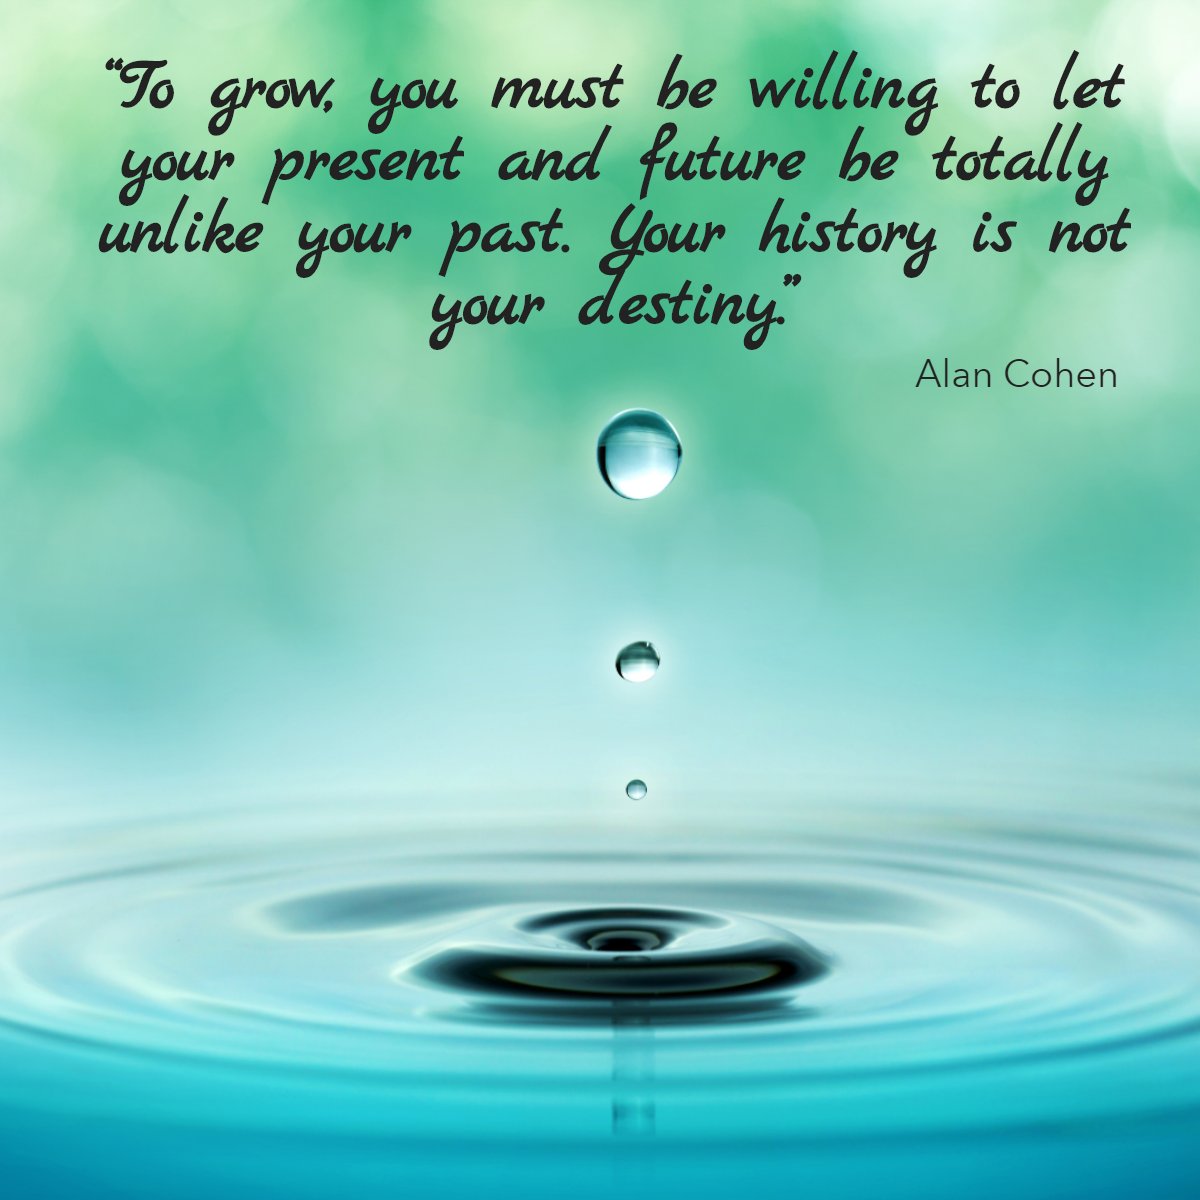 'To grow, you must be willing to let your present and future be totally unlike your past. Your history is not your destiny.' — Alan Cohen 👌 #changes #quotes #totallifechanges #inspirationalquoteoftheday #wisdomquotes #wisdomgoals #francinesellsbaldwin